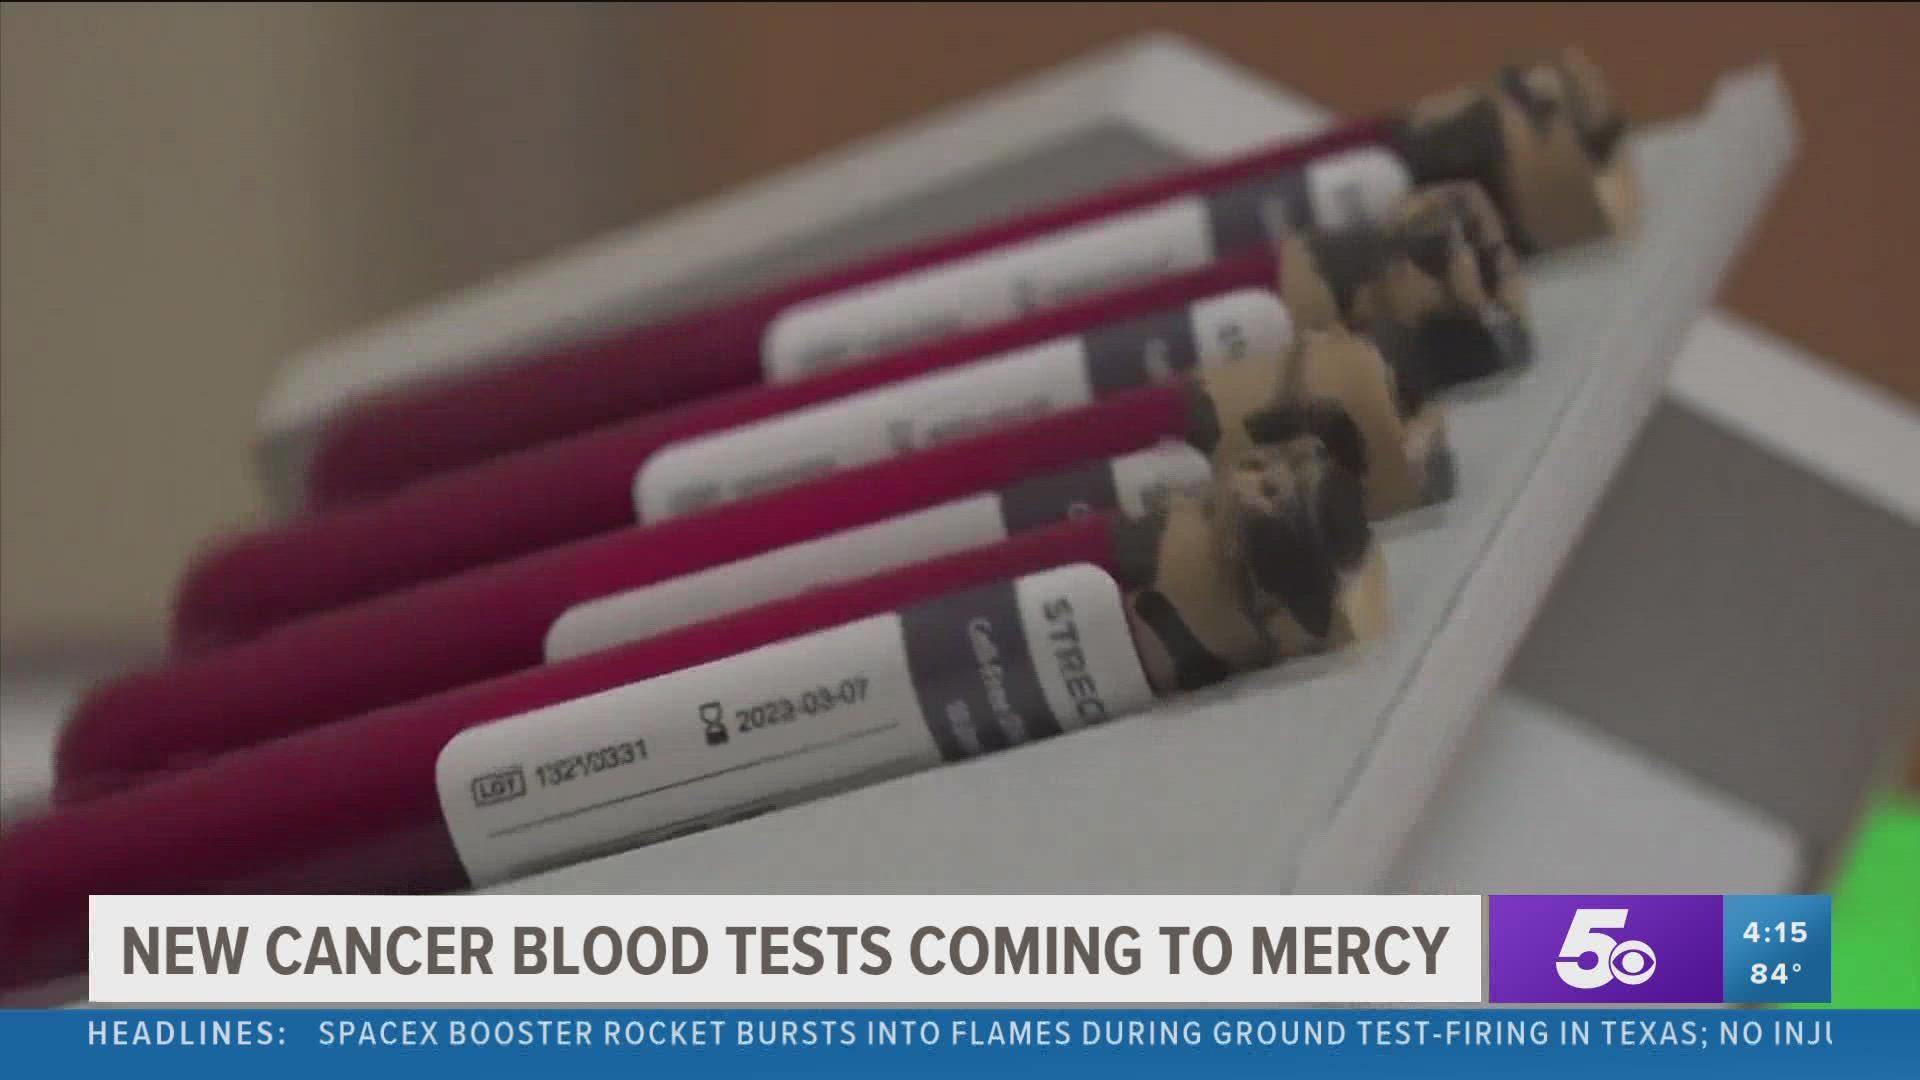 The blood test uses advanced testing capabilities to detect early cancer signals of more than 50 types of cancer.